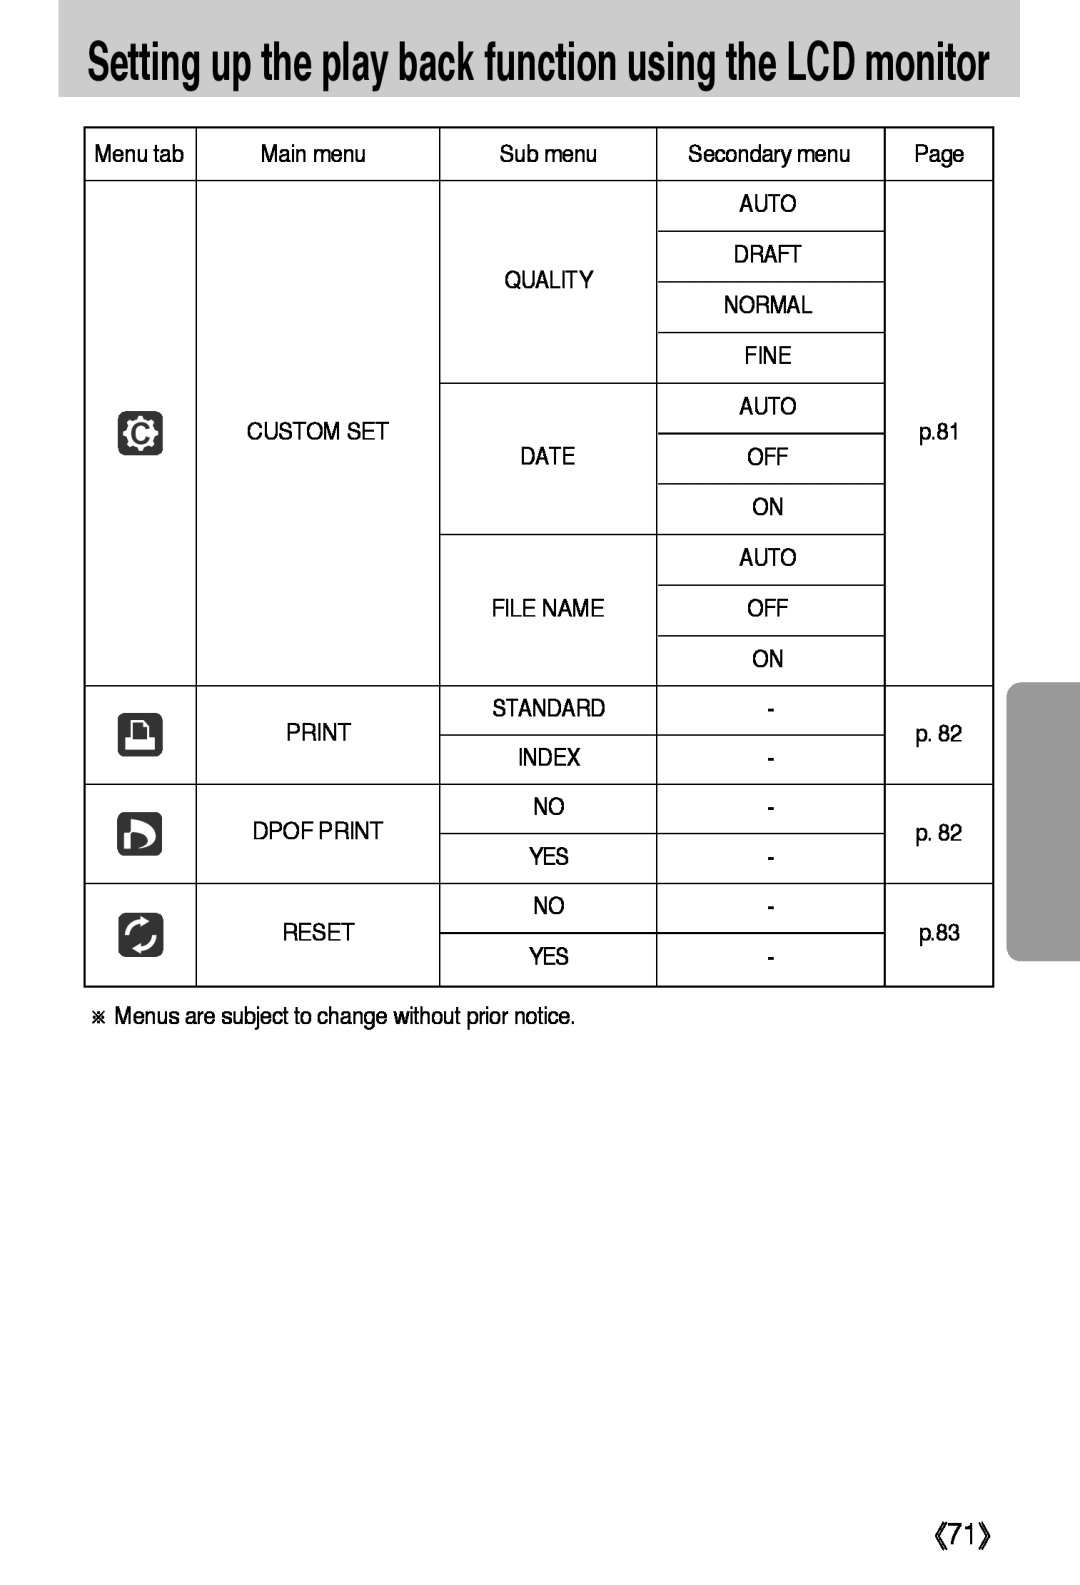 Samsung L50 user manual 《71》, Setting up the play back function using the LCD monitor 